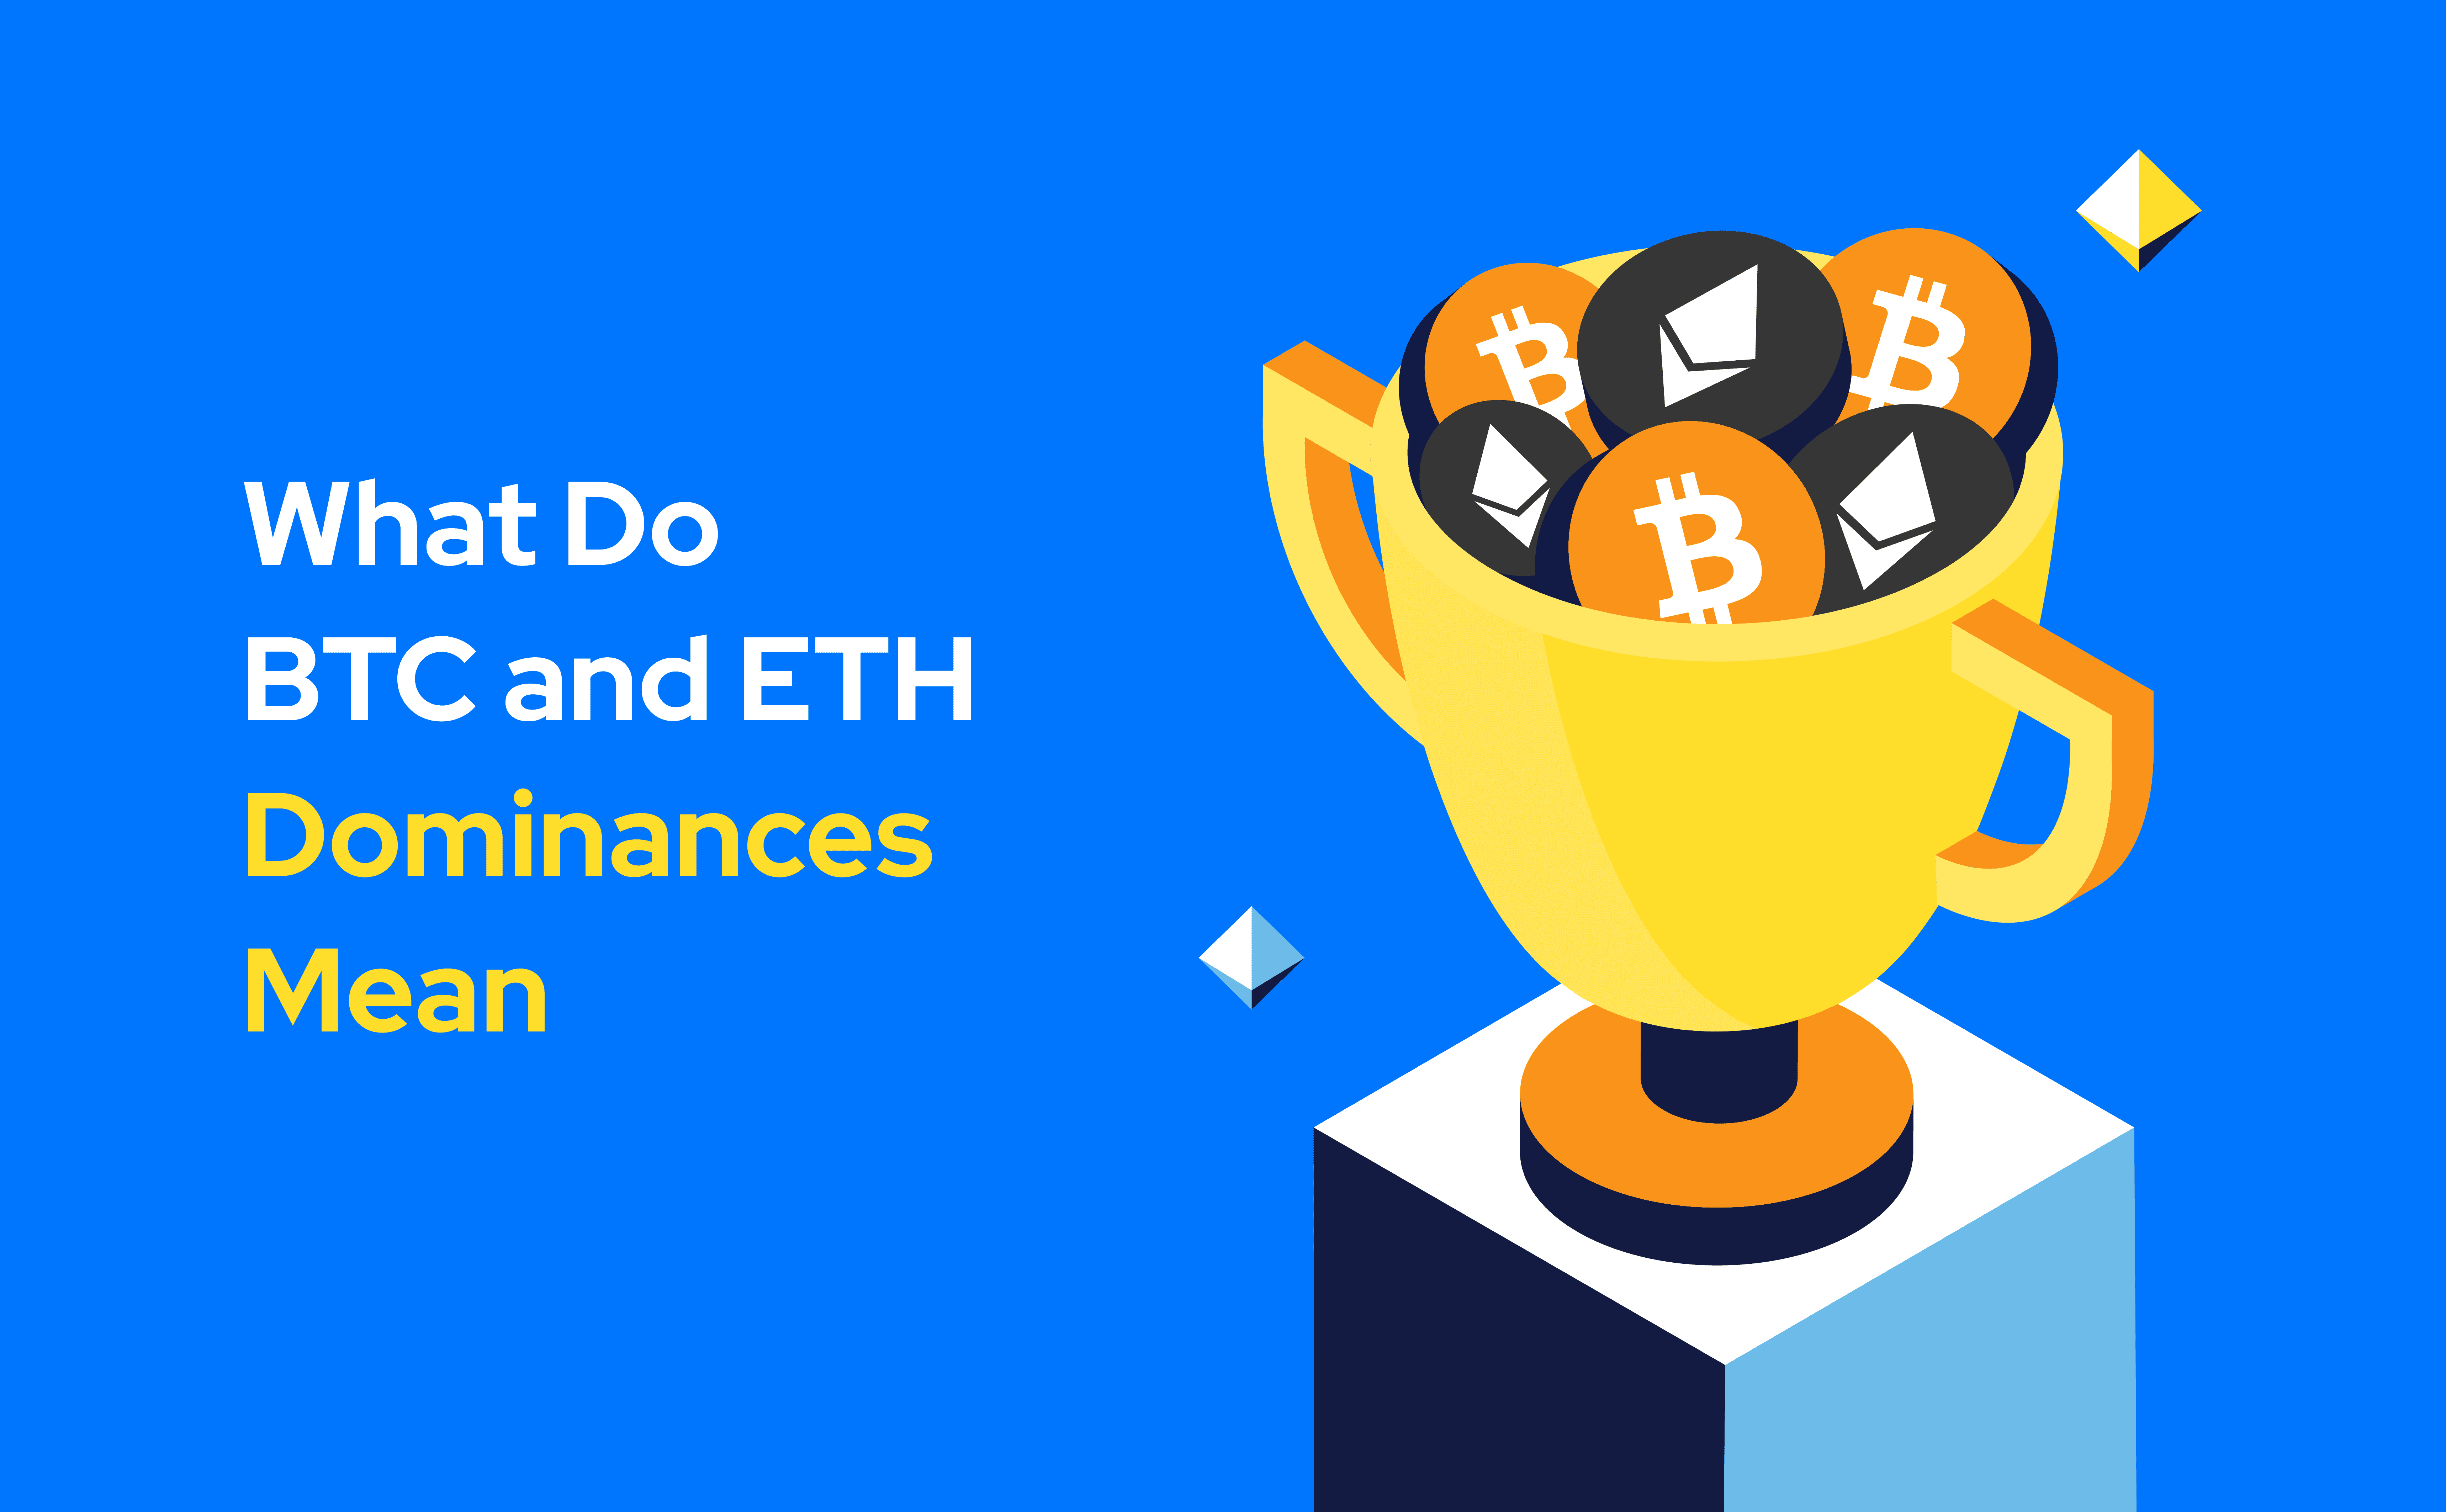 What Do BTC and ETH Dominances Mean